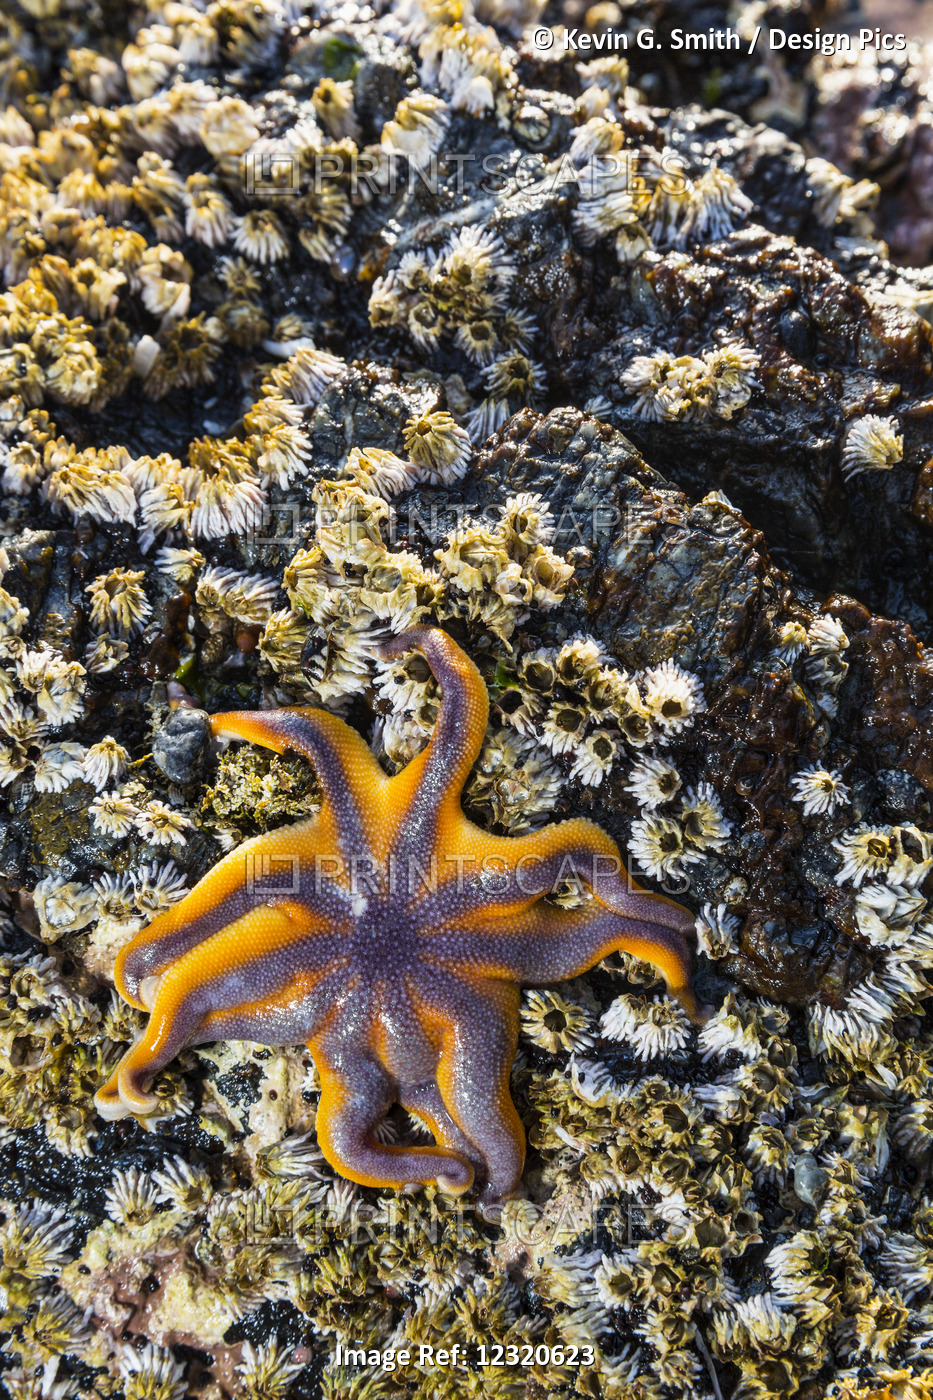 Detail View Of A Sea Star In A Tidal Pool With Barnacles, Hesketh Island, ...